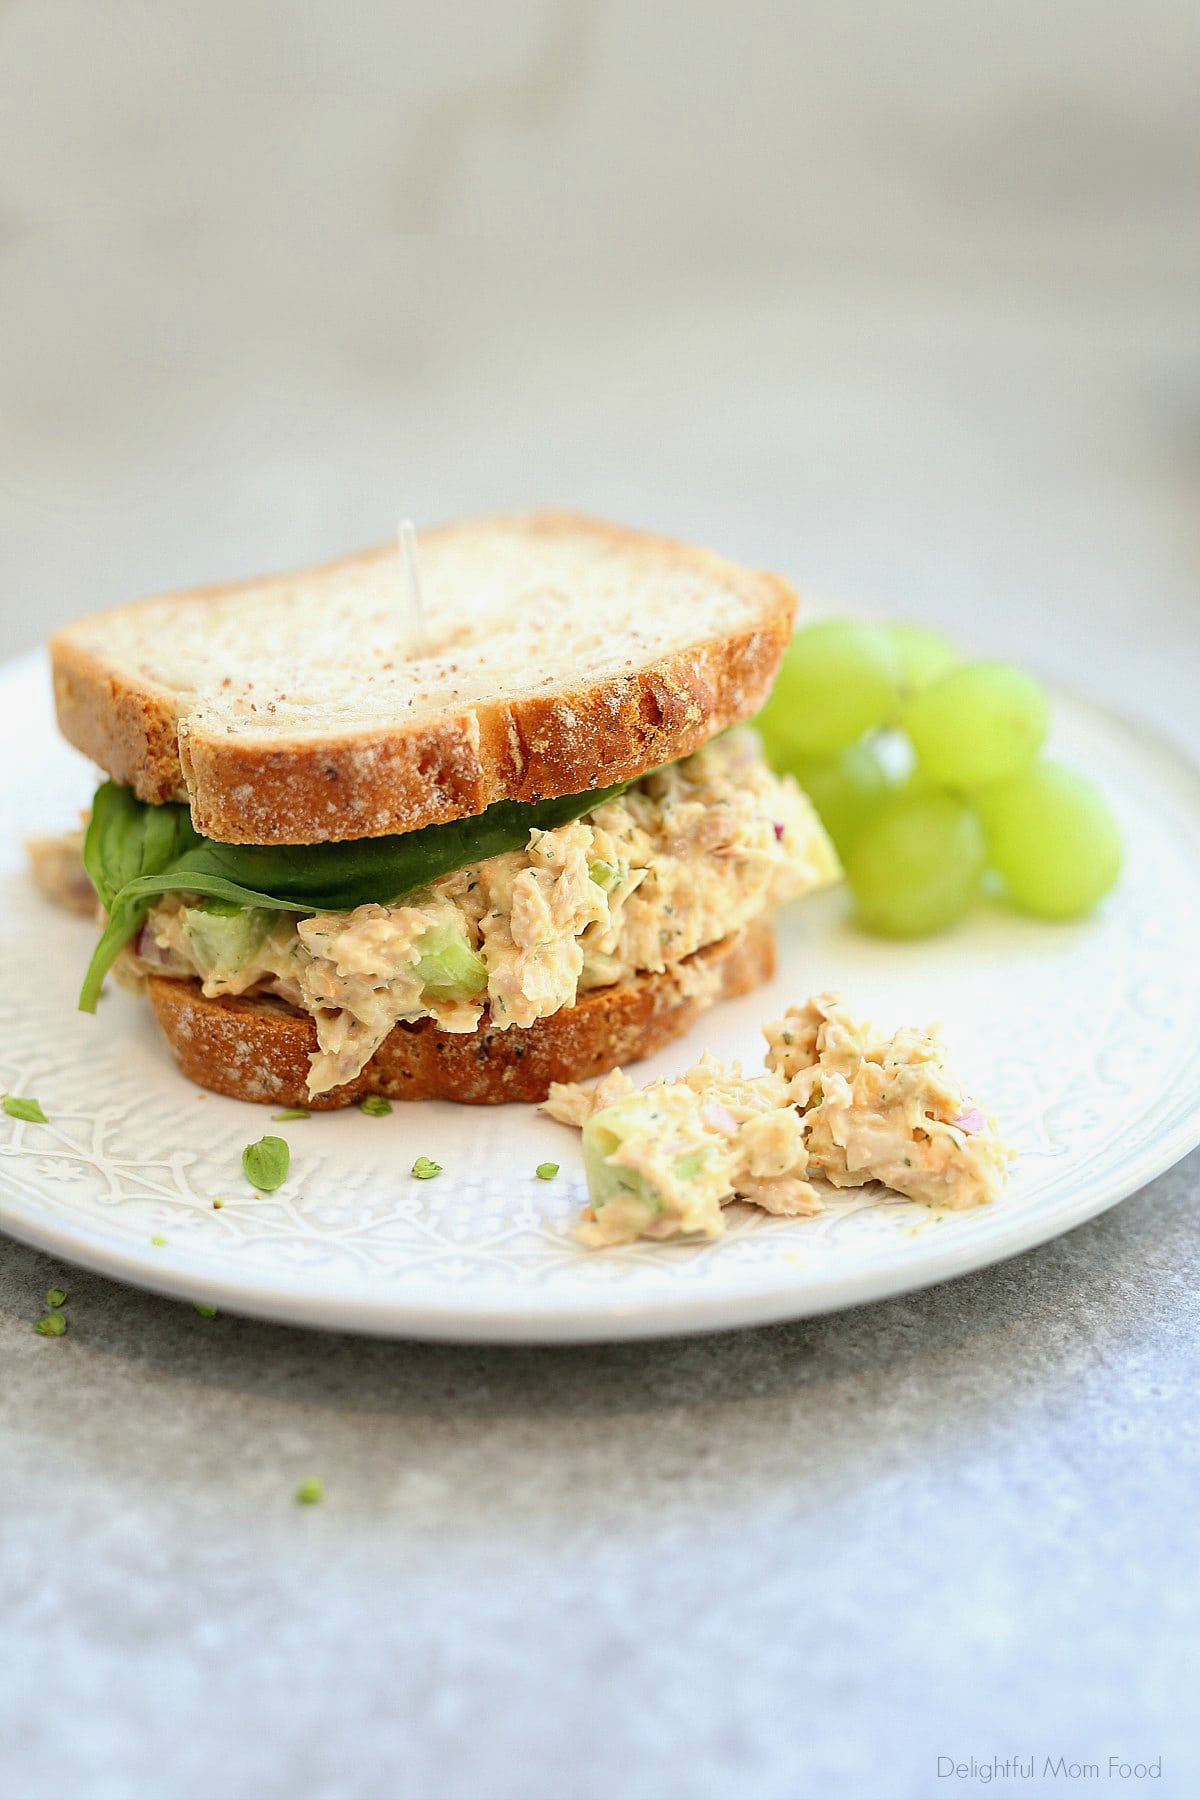 Vegan tuna sandwich on a plate with a side of green grapes.